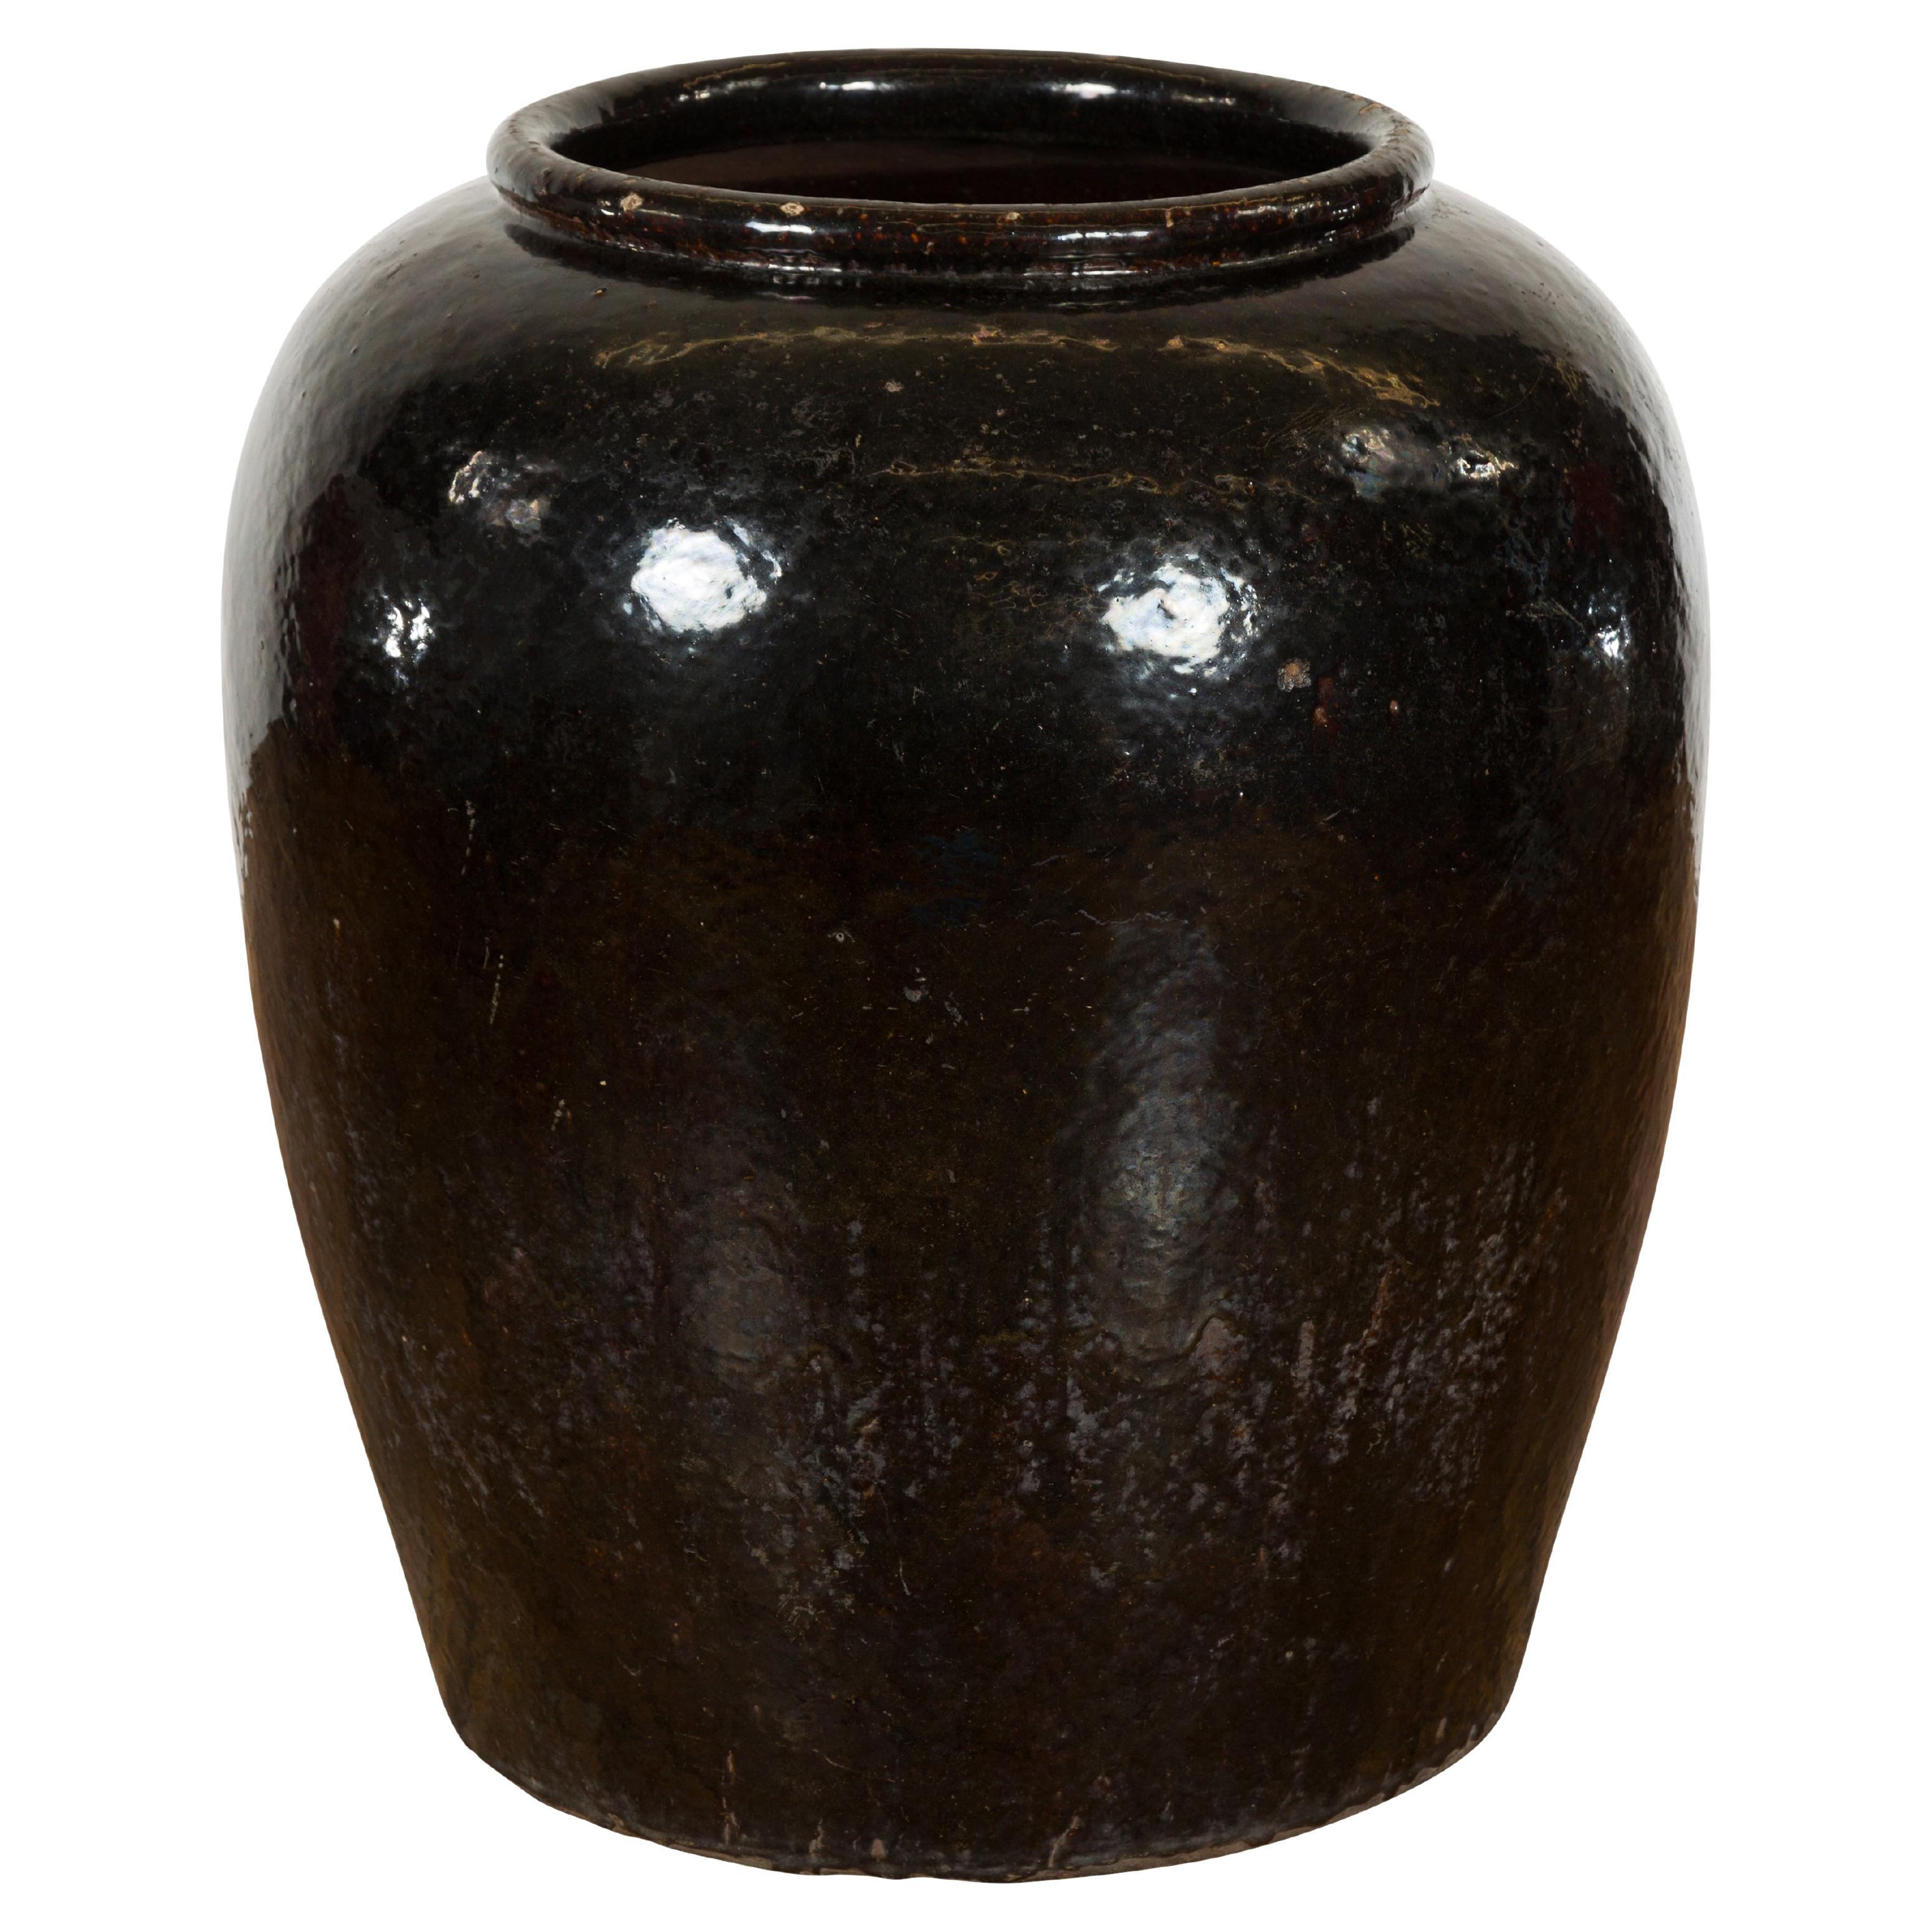 Vintage Oversized Thai Black Glazed Ceramic Planter with Brown Accents